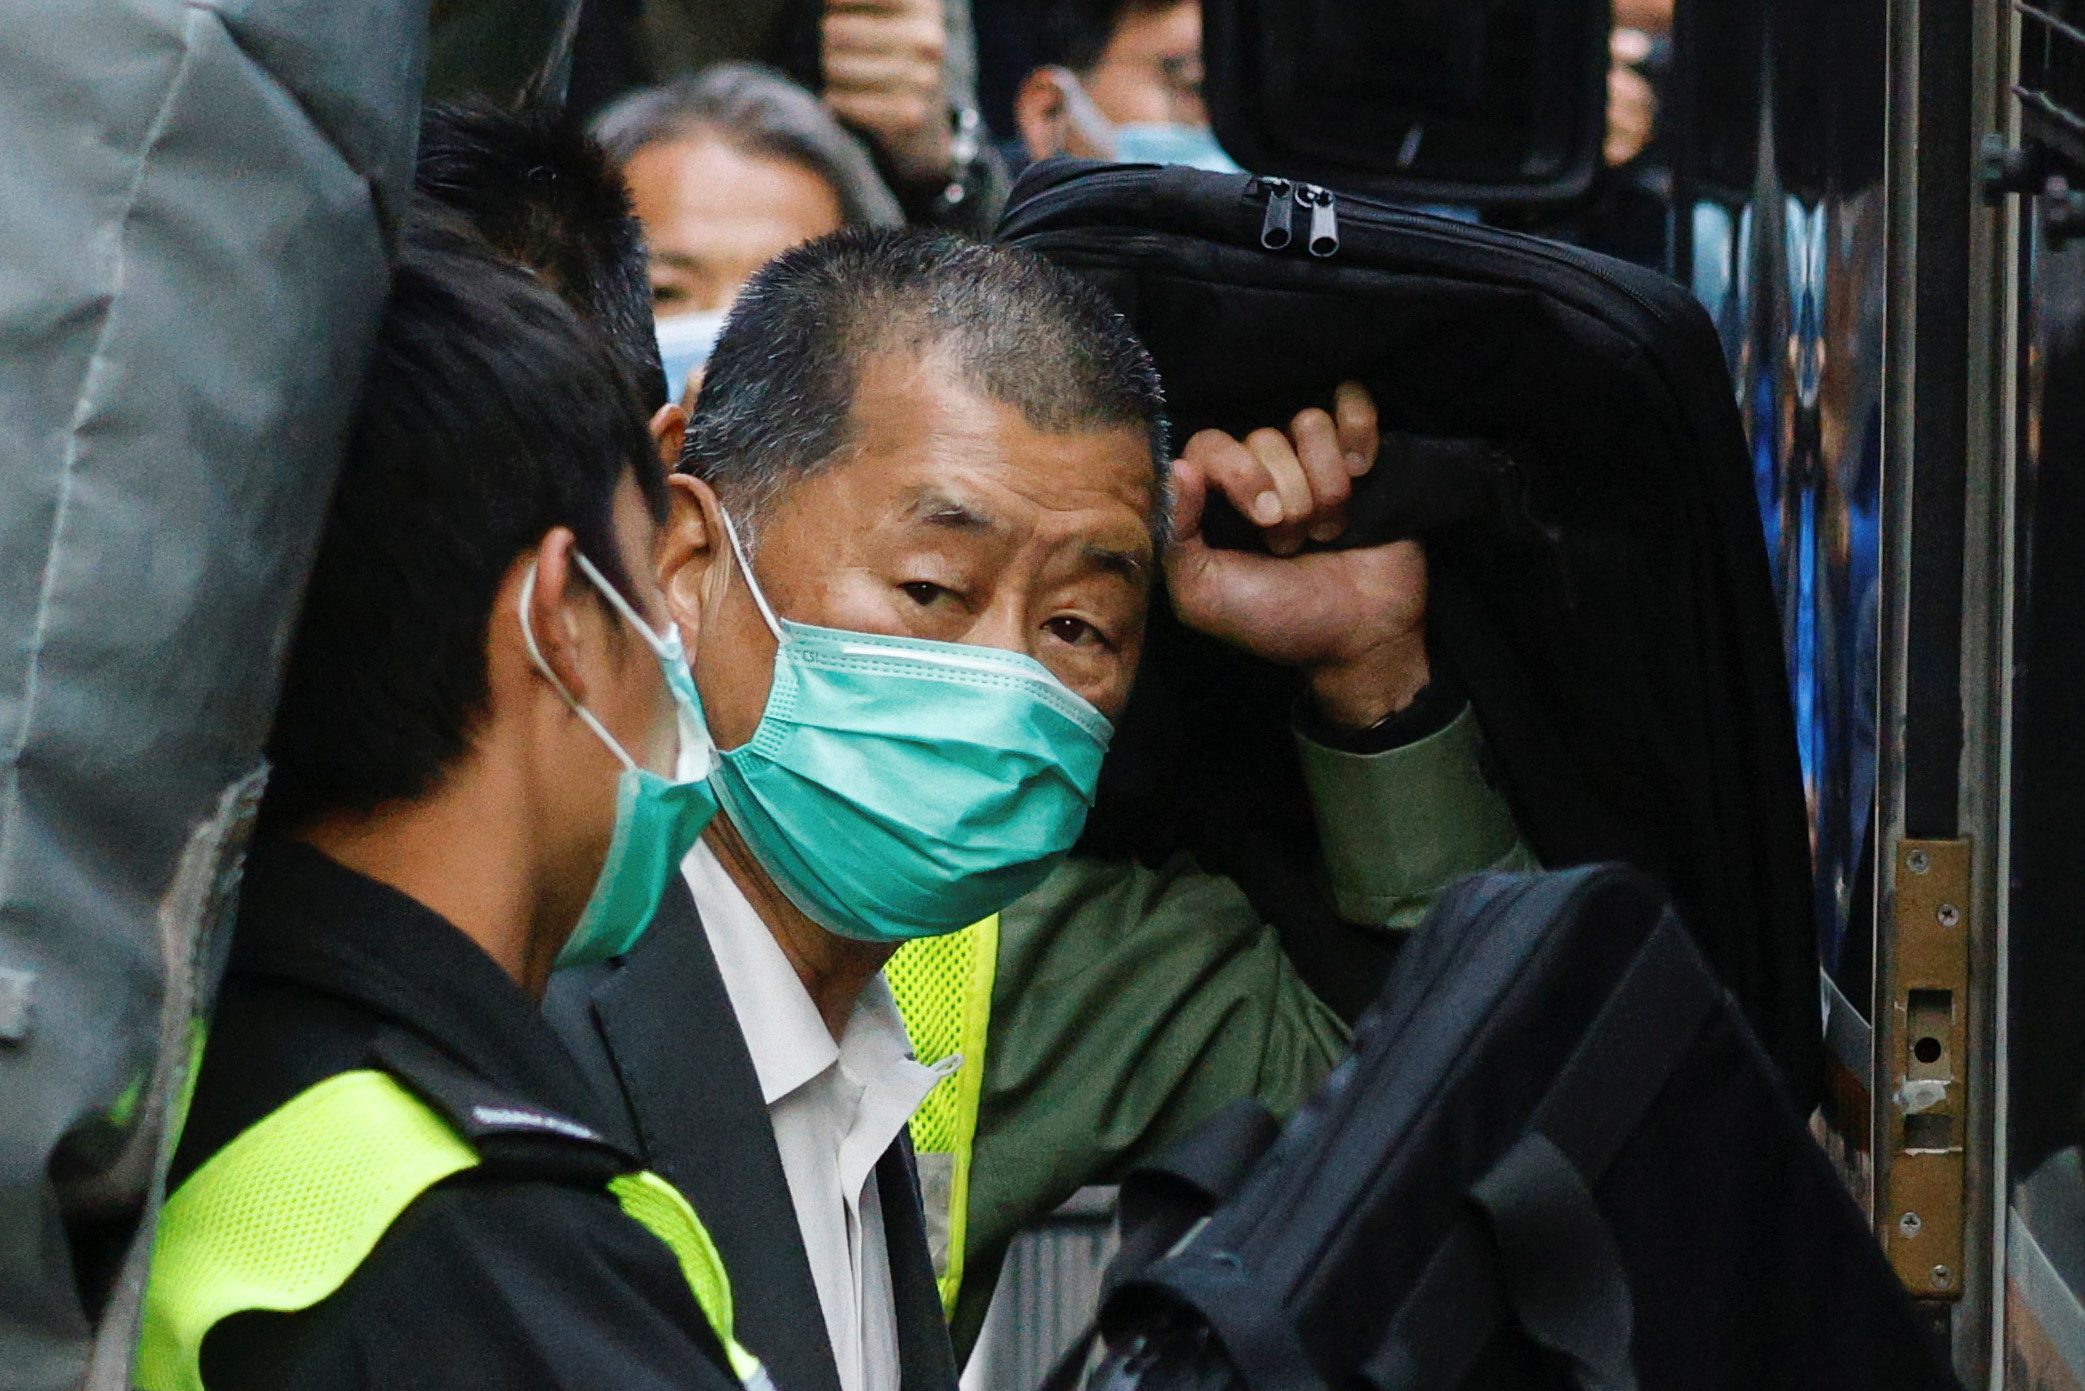 Hong Kong tycoon Jimmy Lai among 3 pleading guilty to illegal assembly